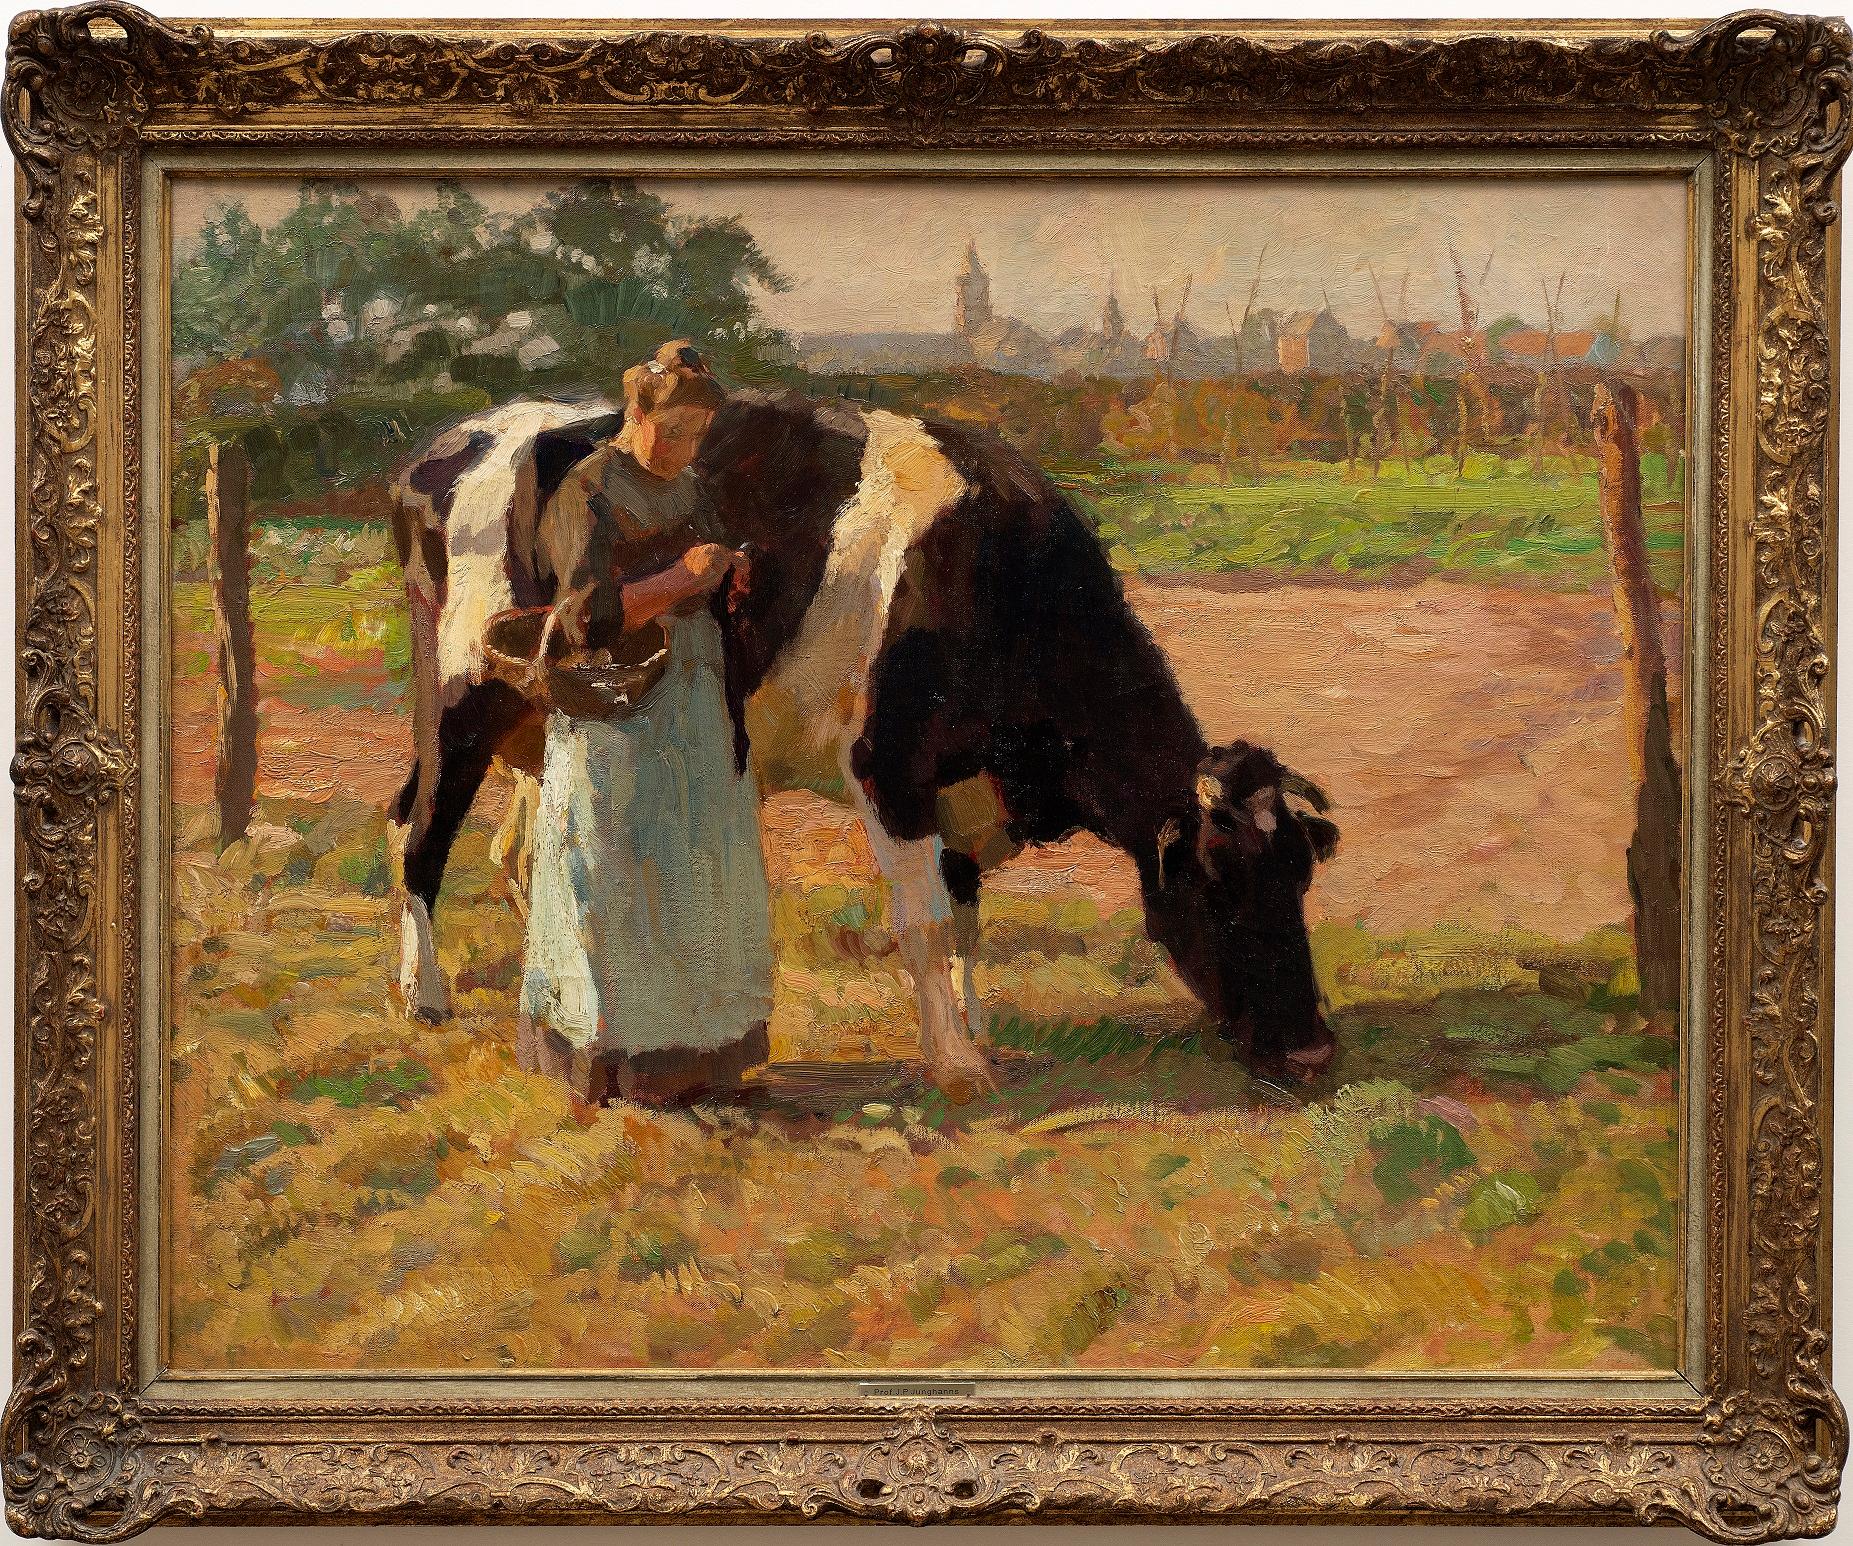 “Summer in the Pasture (Farmer’s Wife with Cow)” Julius Paul Junghanns